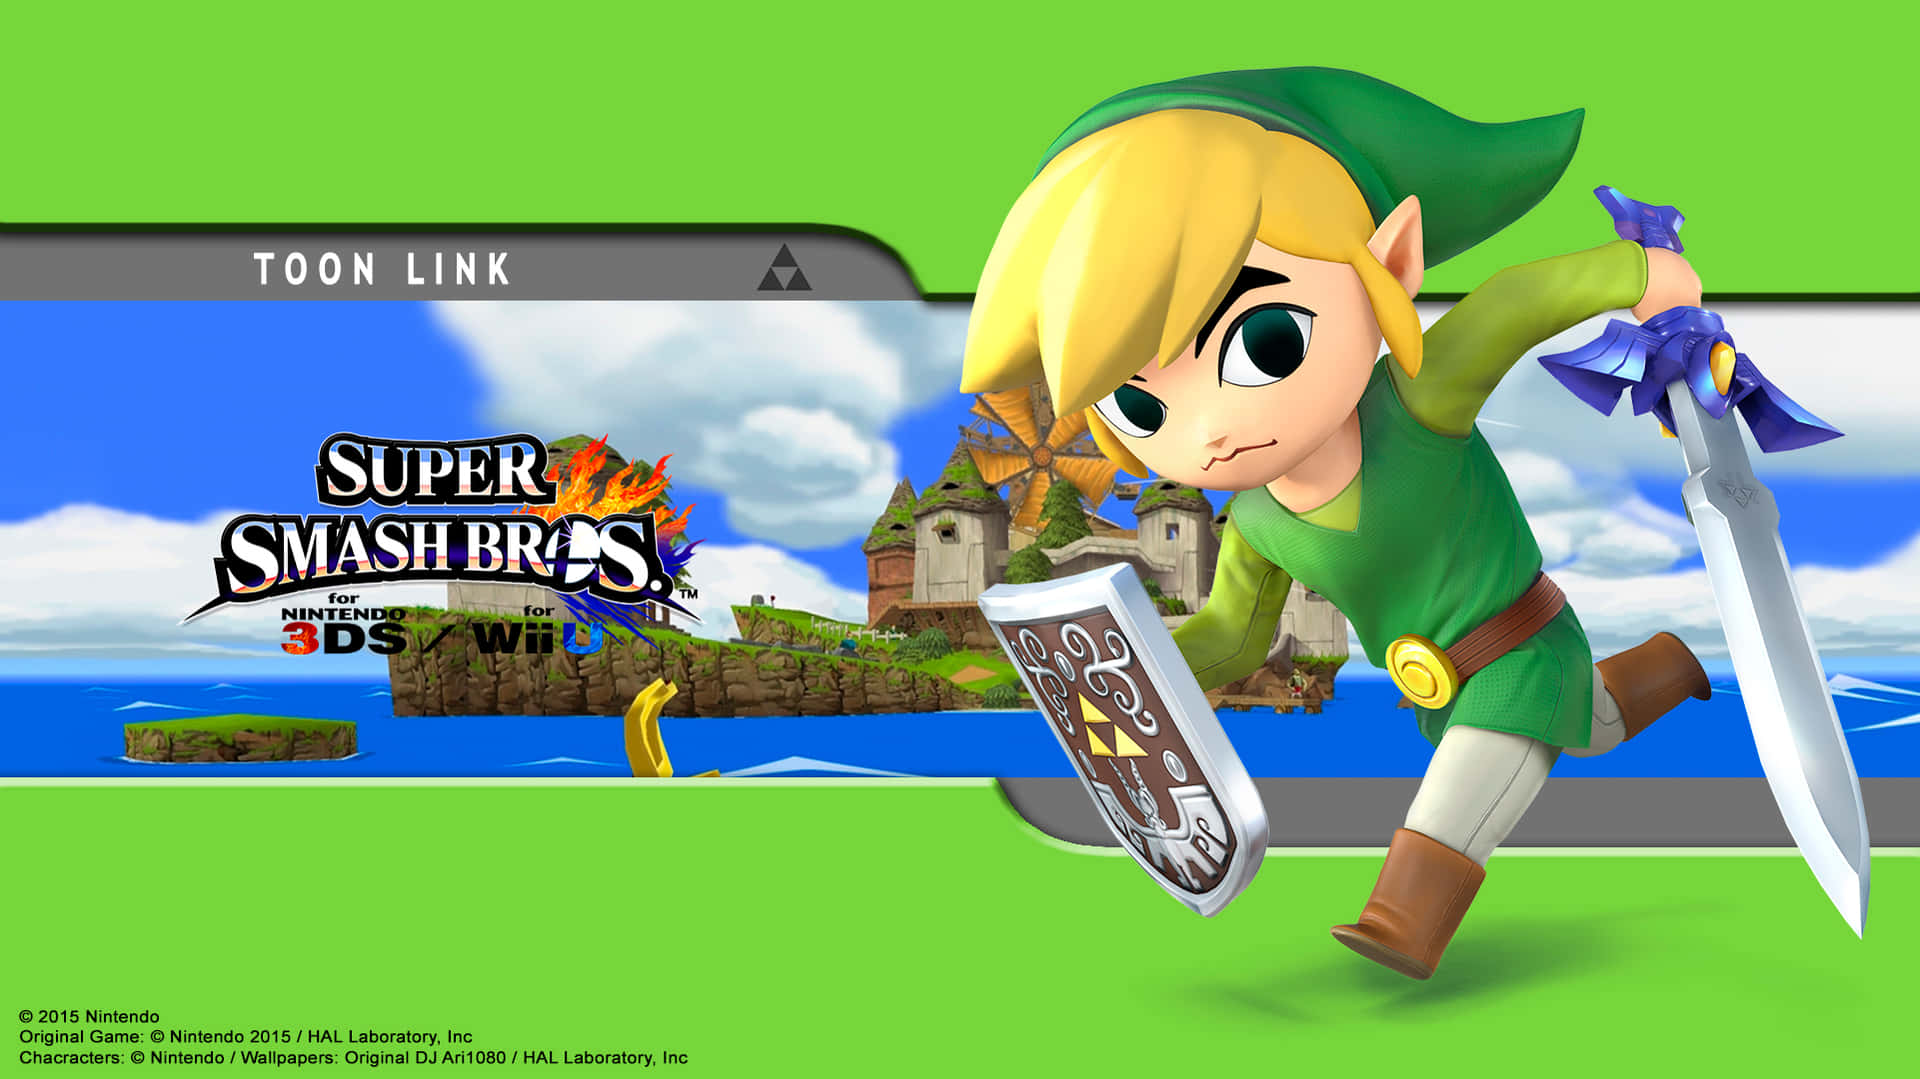 Toonlink In Super Smash Bros 3d Would Be Translated To: 